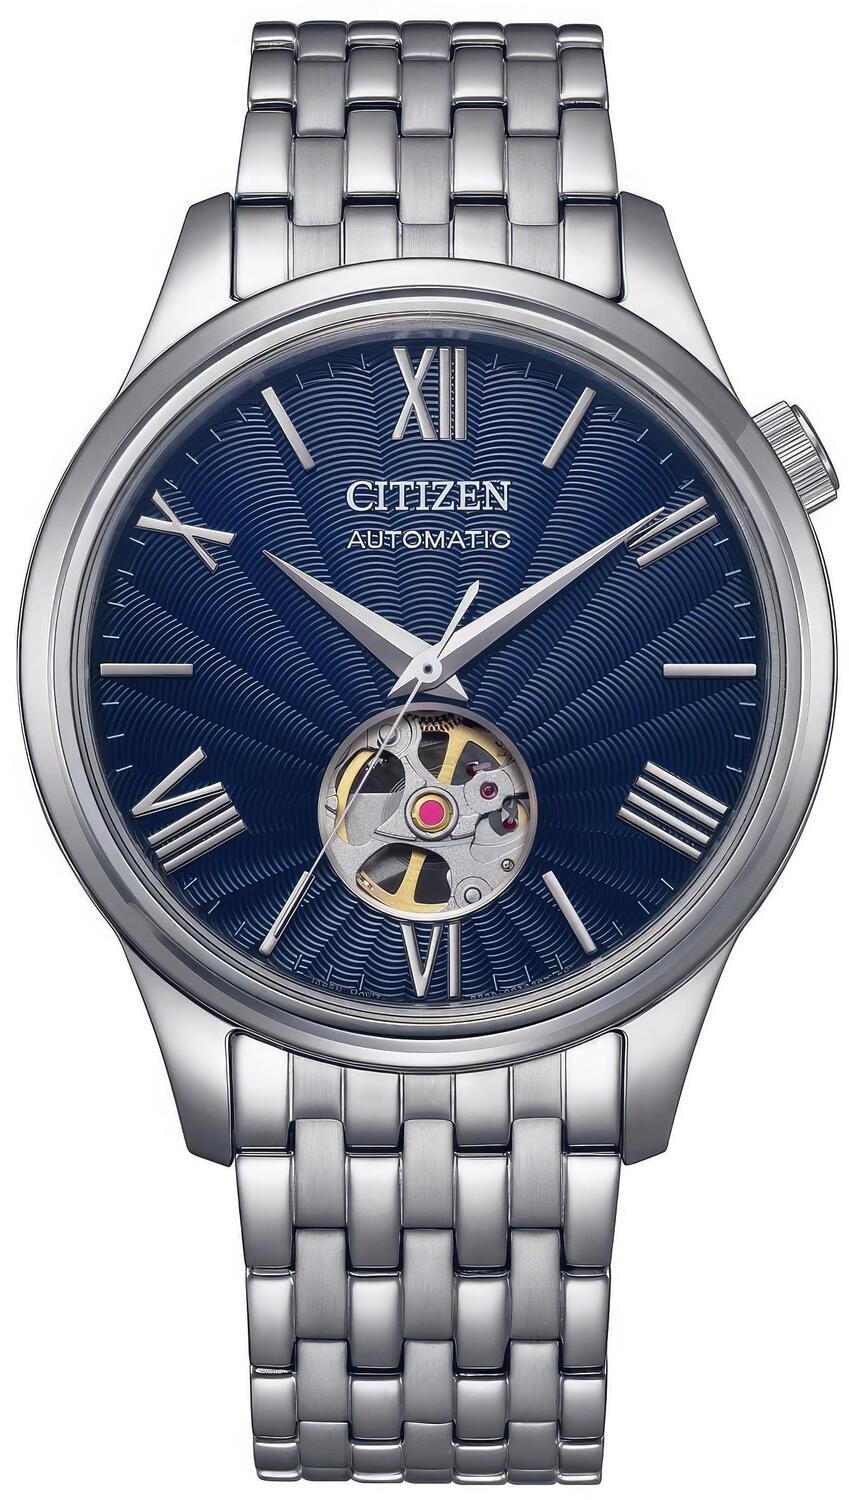 Citizen Classic Open Heart NH9130-84L 40mm 50m WR sapphire crystal automatic men’s watch stainless steel bracelet